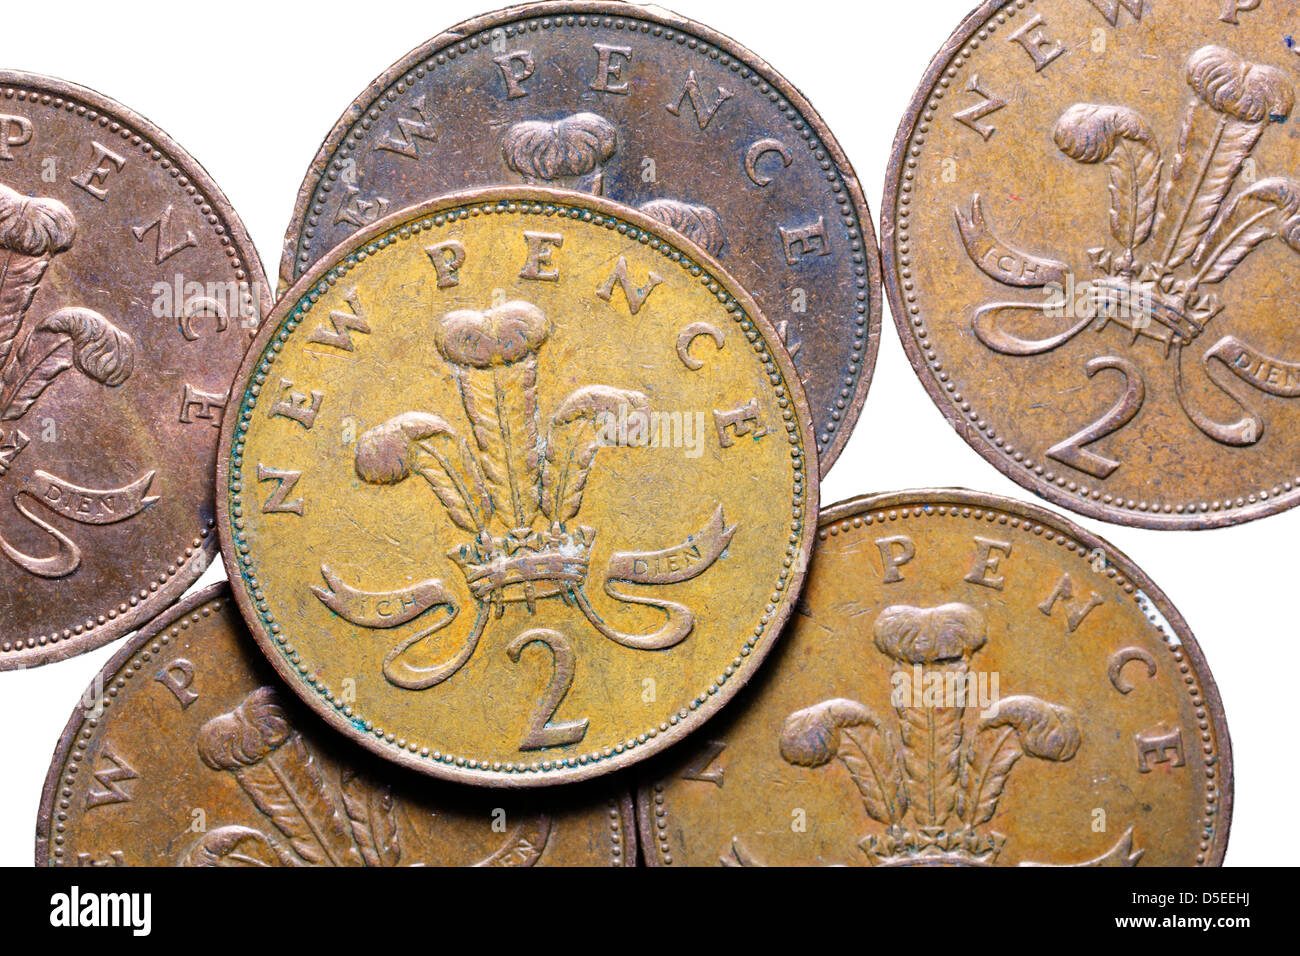 Pile of 2 pence coins, UK, on white background Stock Photo